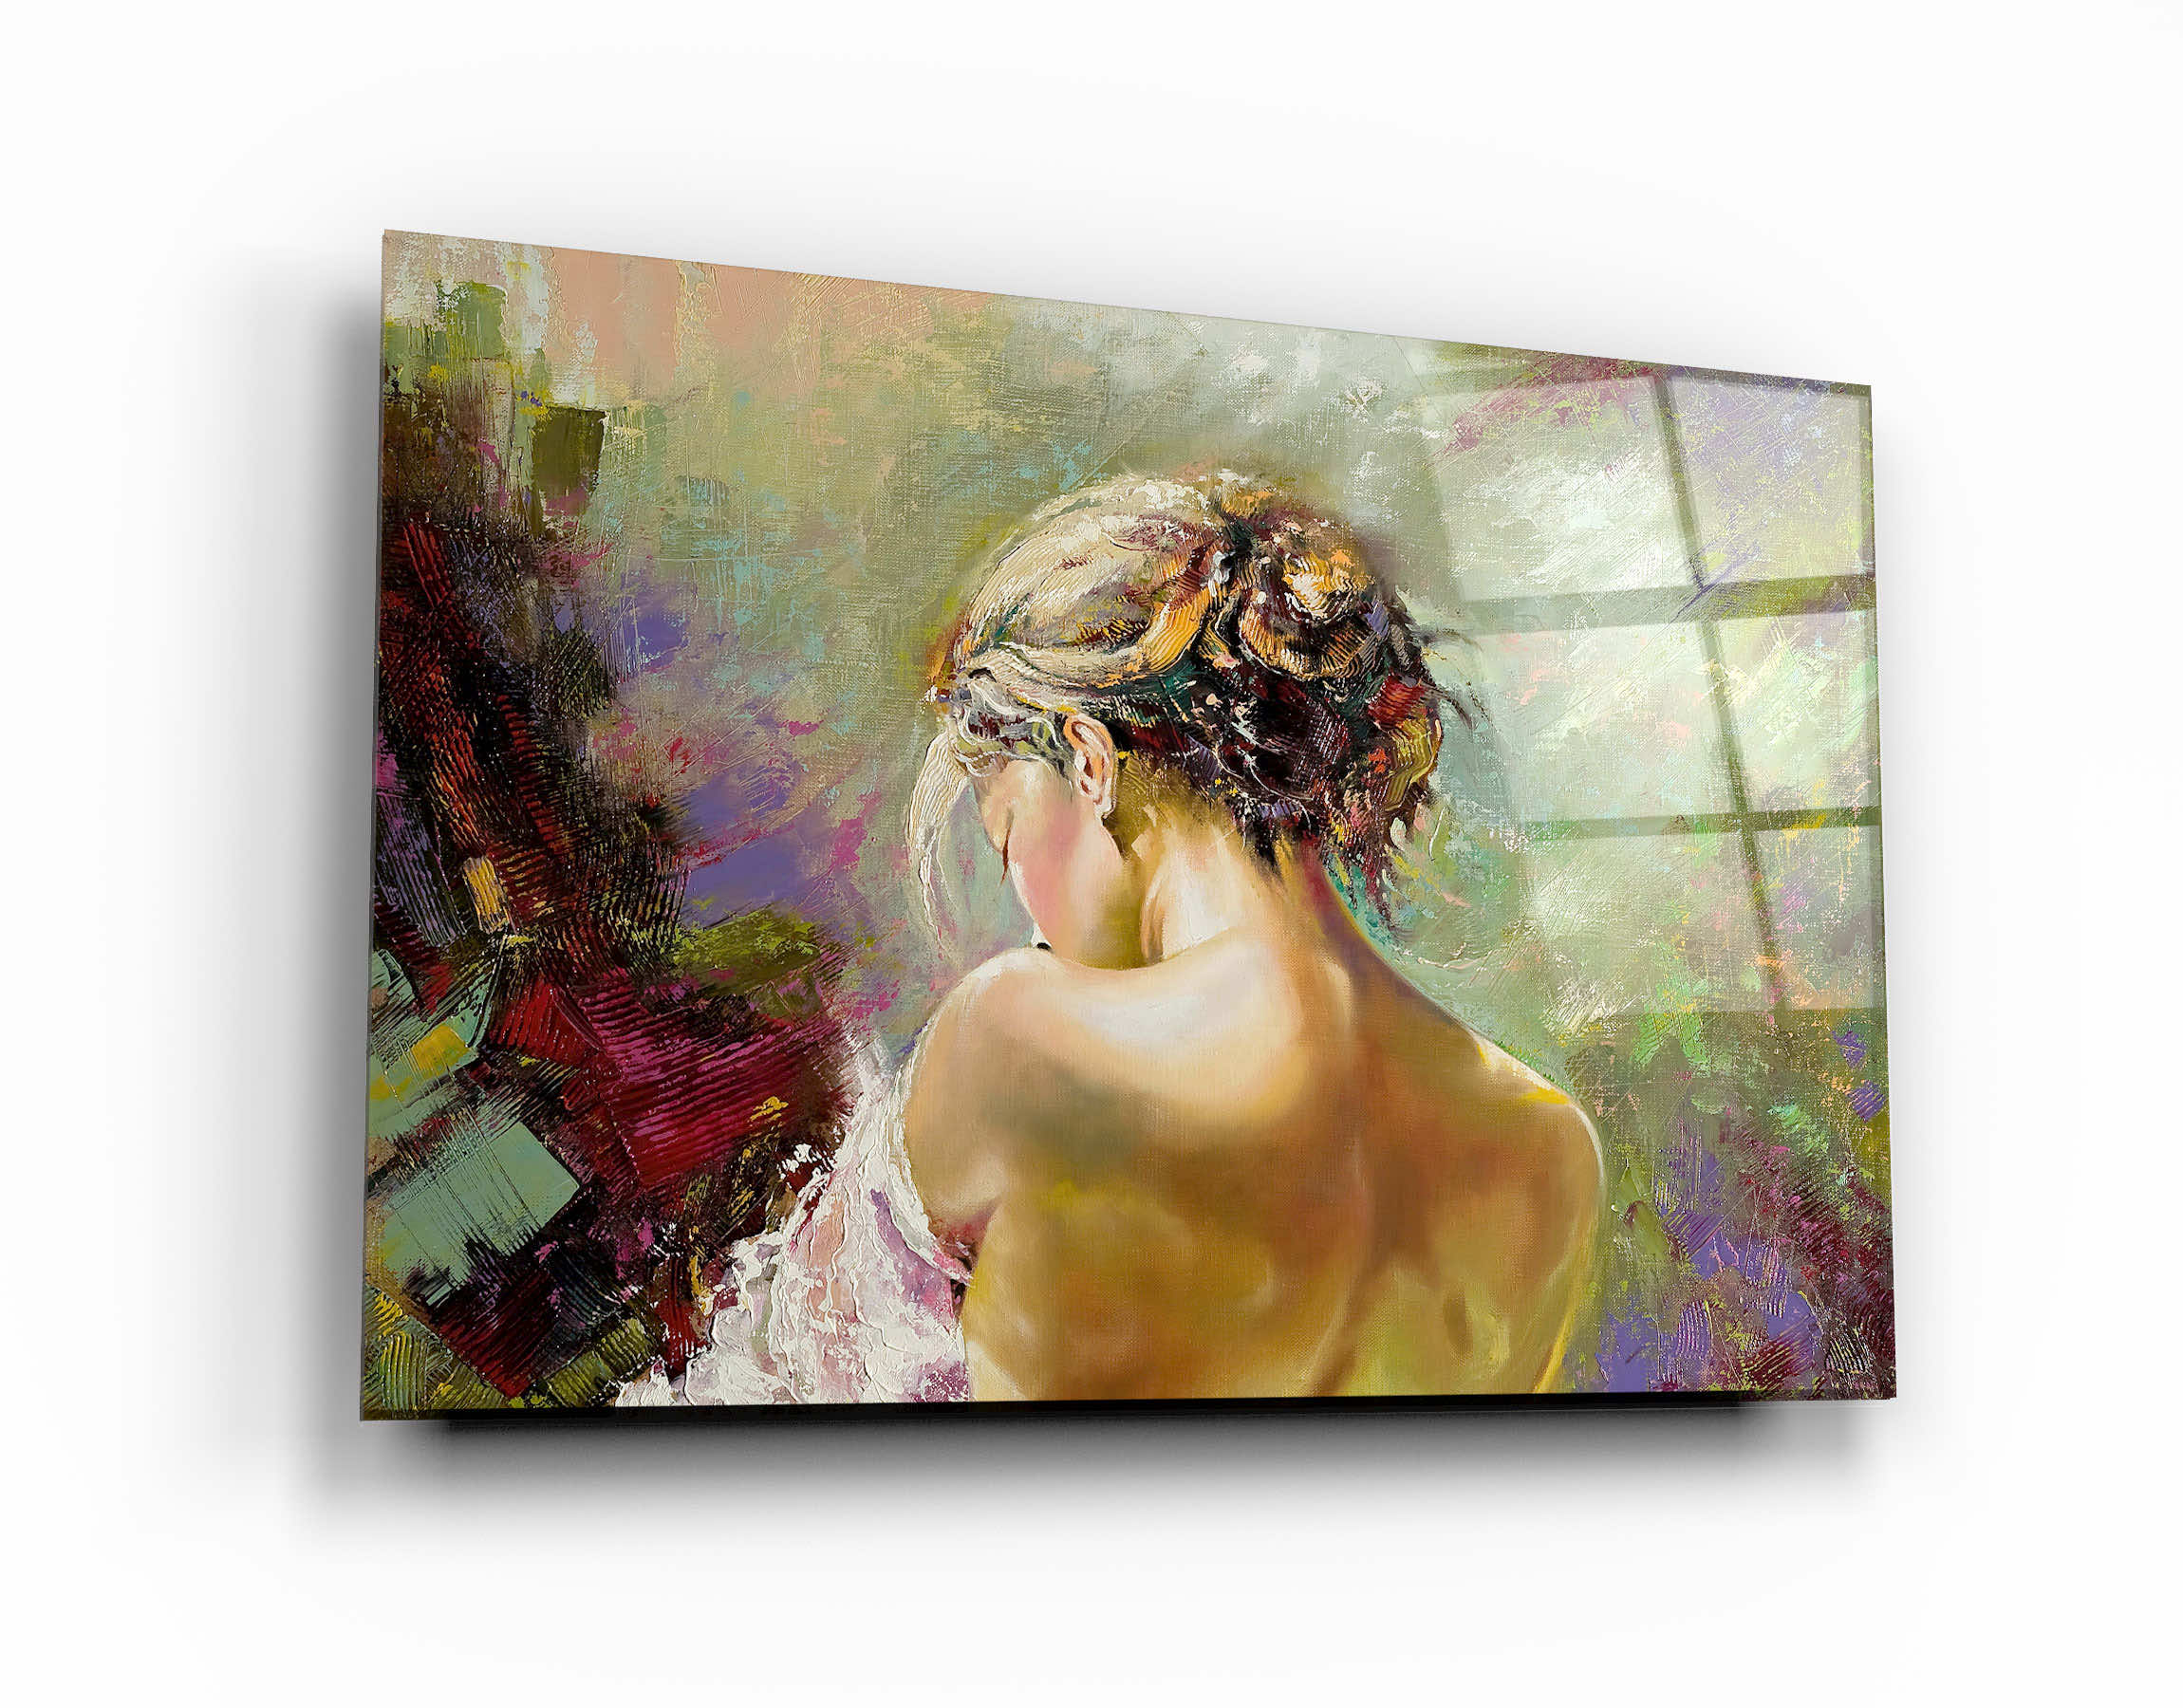 ・"Oil Painting - Alone"・Glass Wall Art